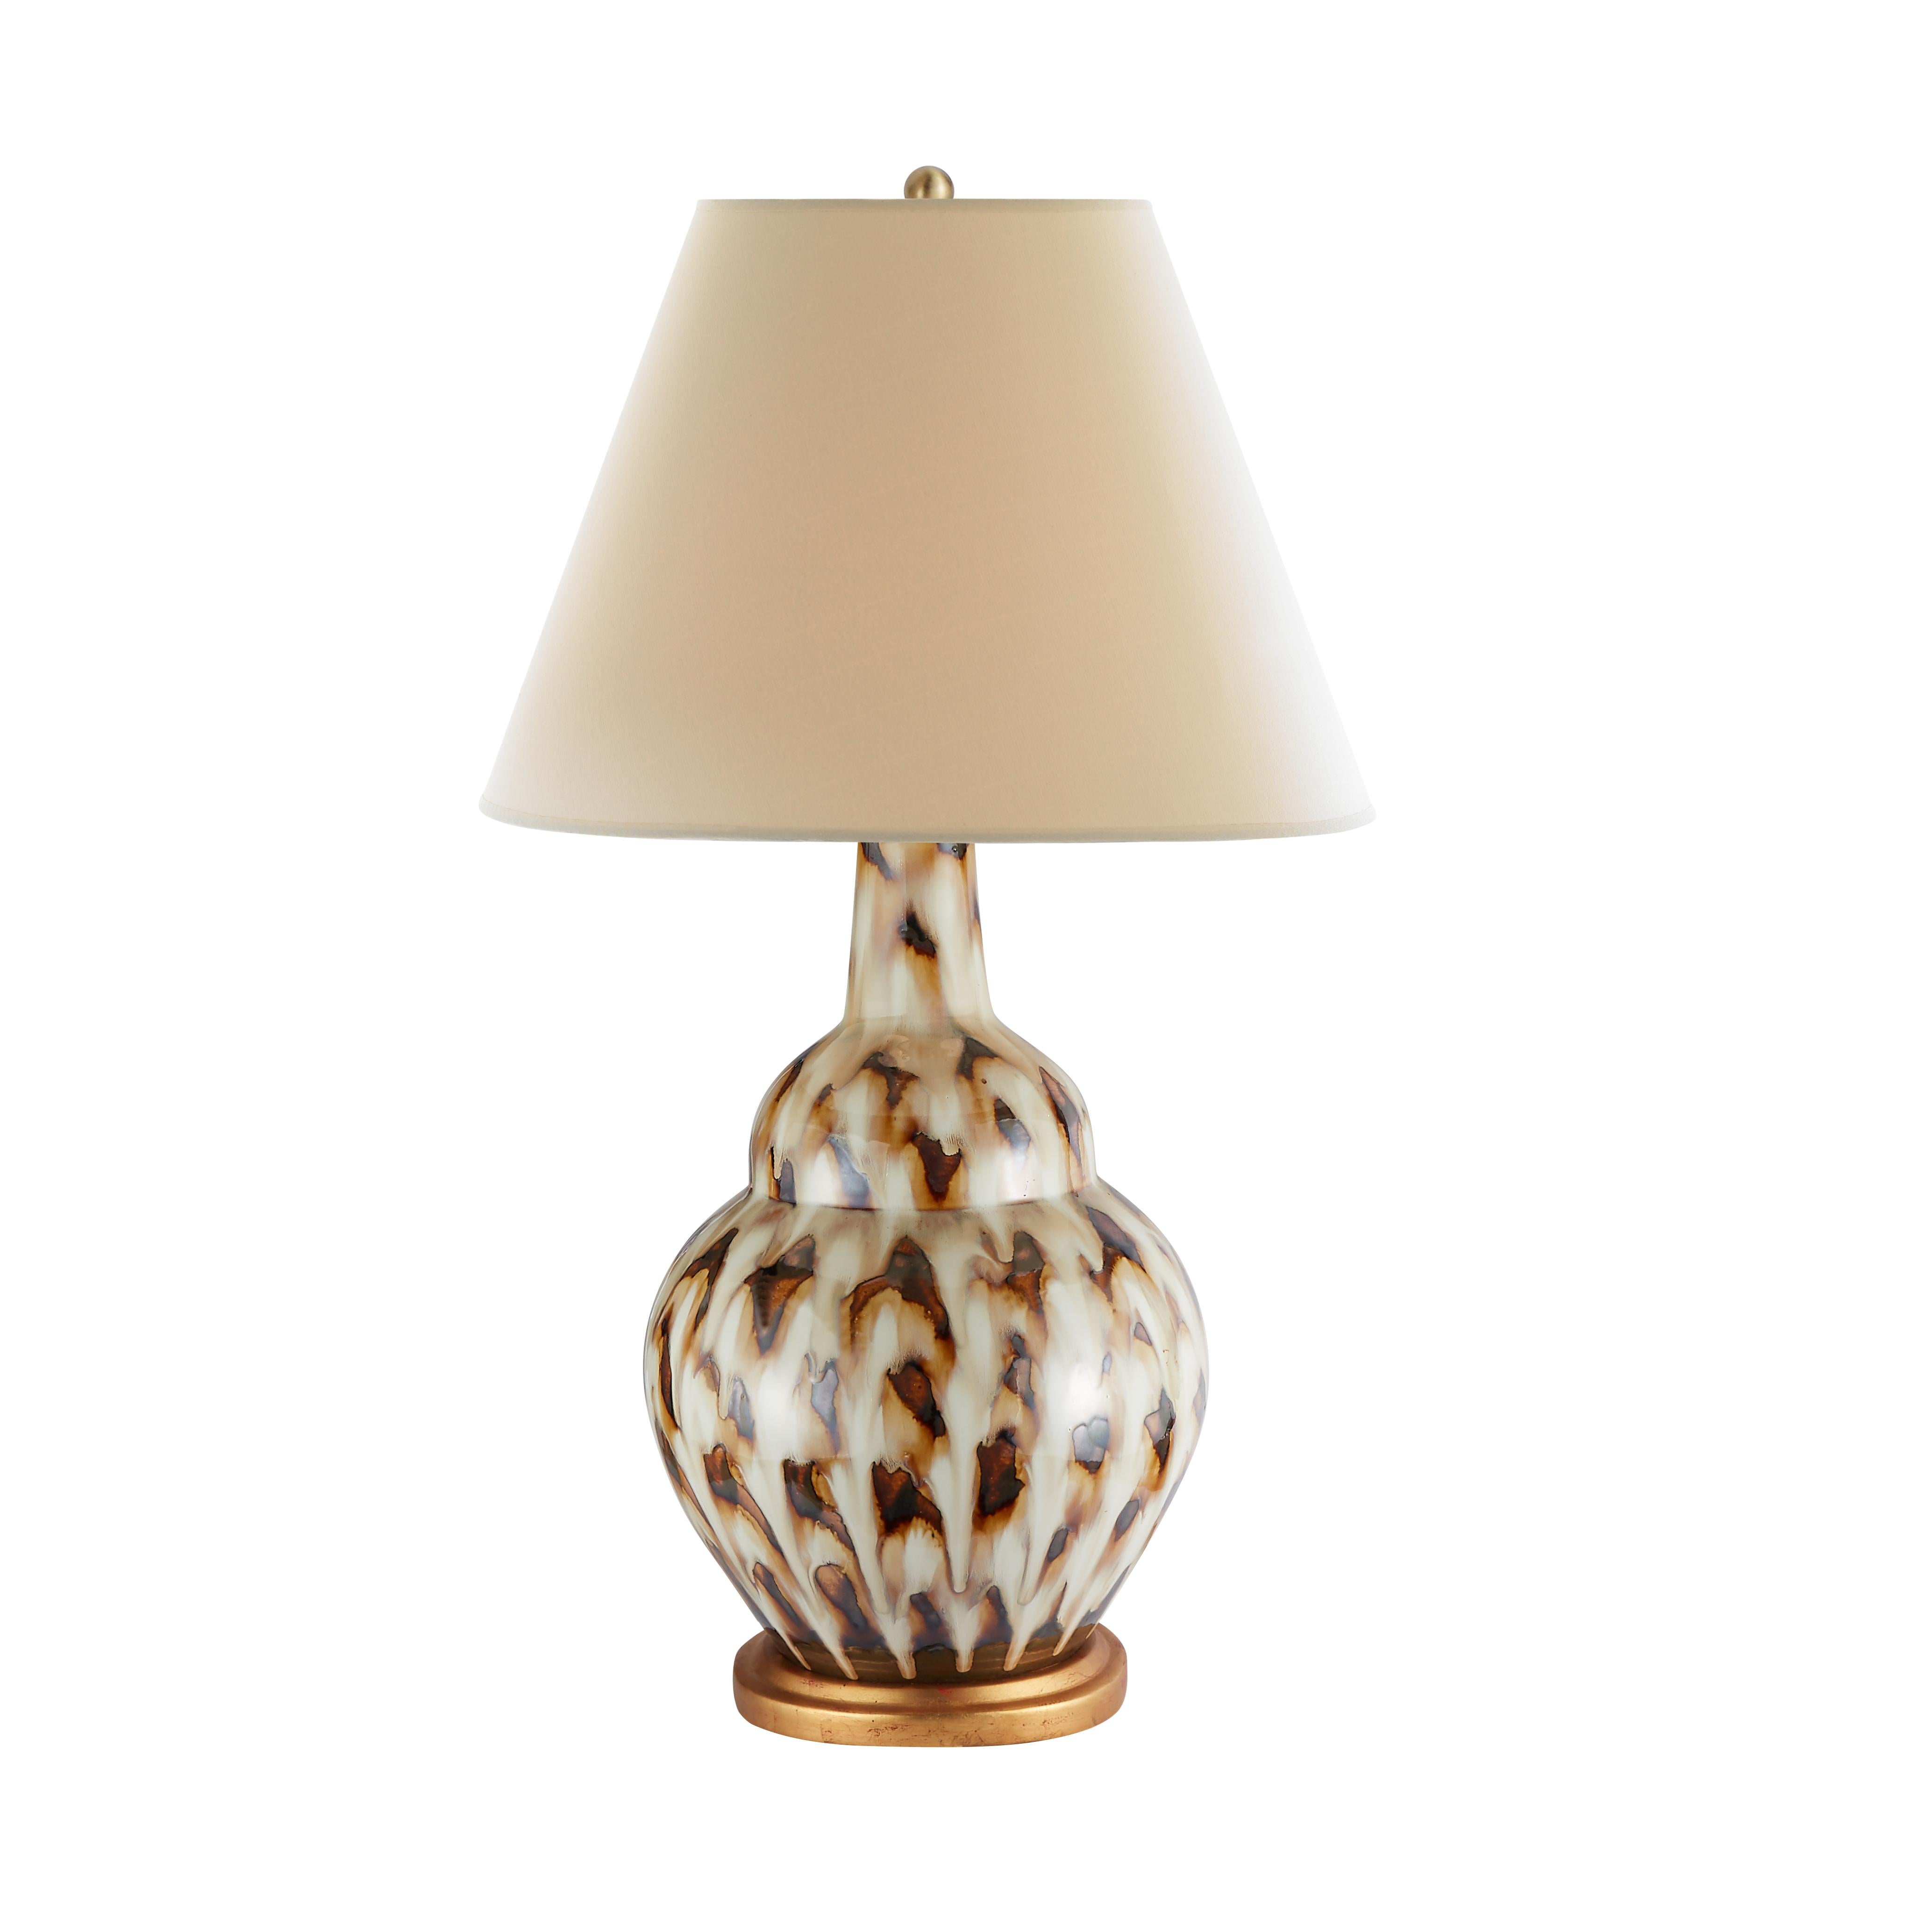 The classical silhouette of our Pheasant Feather lamp adds a graceful, subdued ambiance to any side table. The lamp’s ceramic vase is hand-painted in warm brown tones before a final glazing and firing to produce this stunning allover pattern. It is